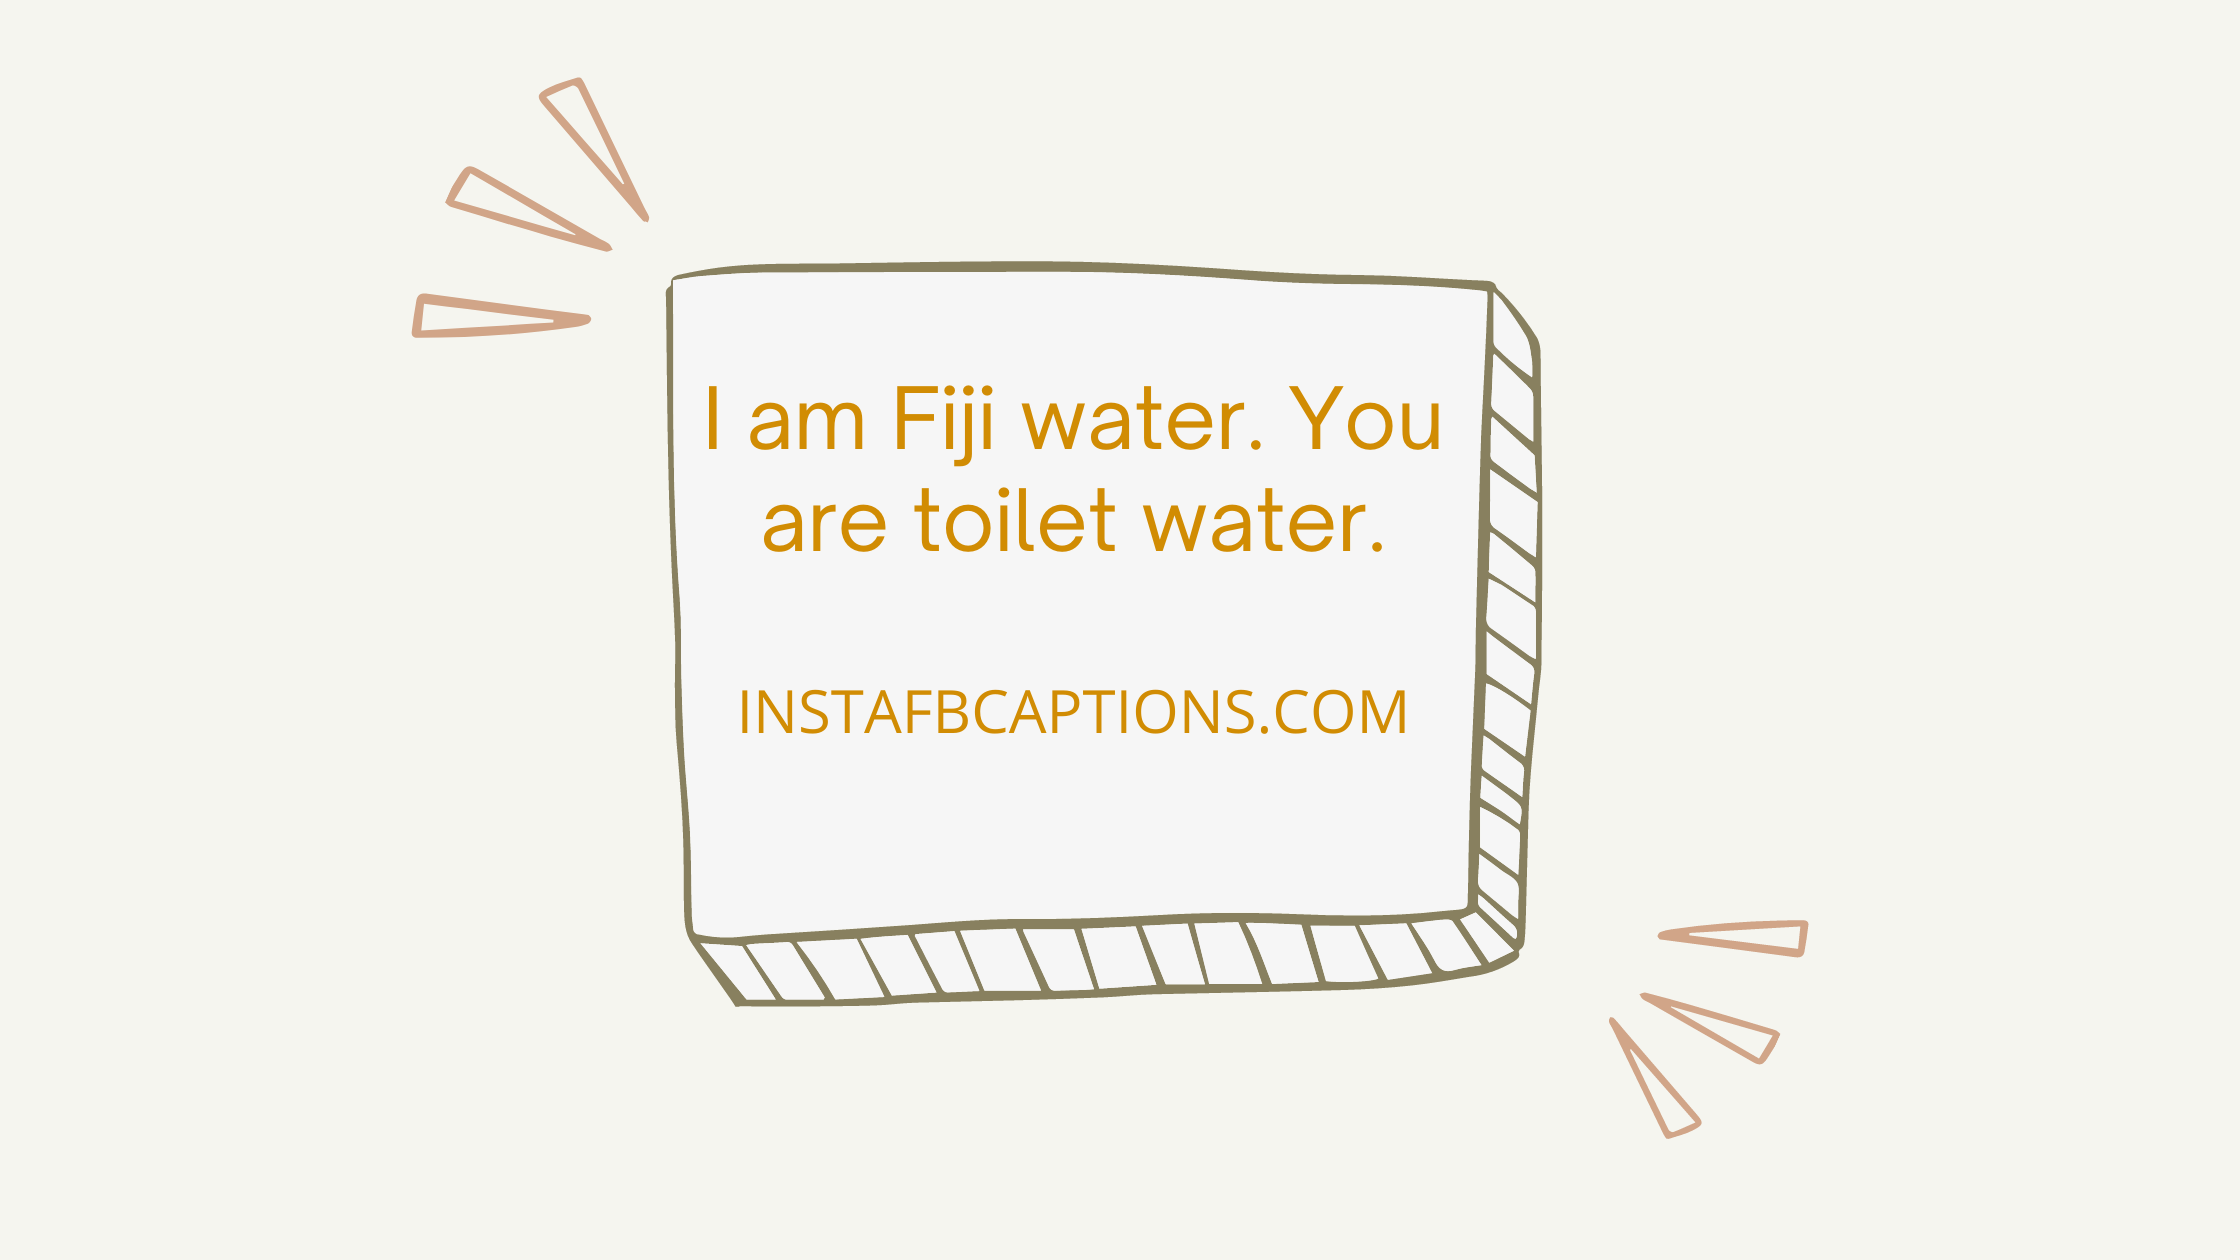 I am Fiji water. You are toilet water.  - Savage Captions for Ex - [Full on Savage] Captions to Make Your Ex Jealous in 2023